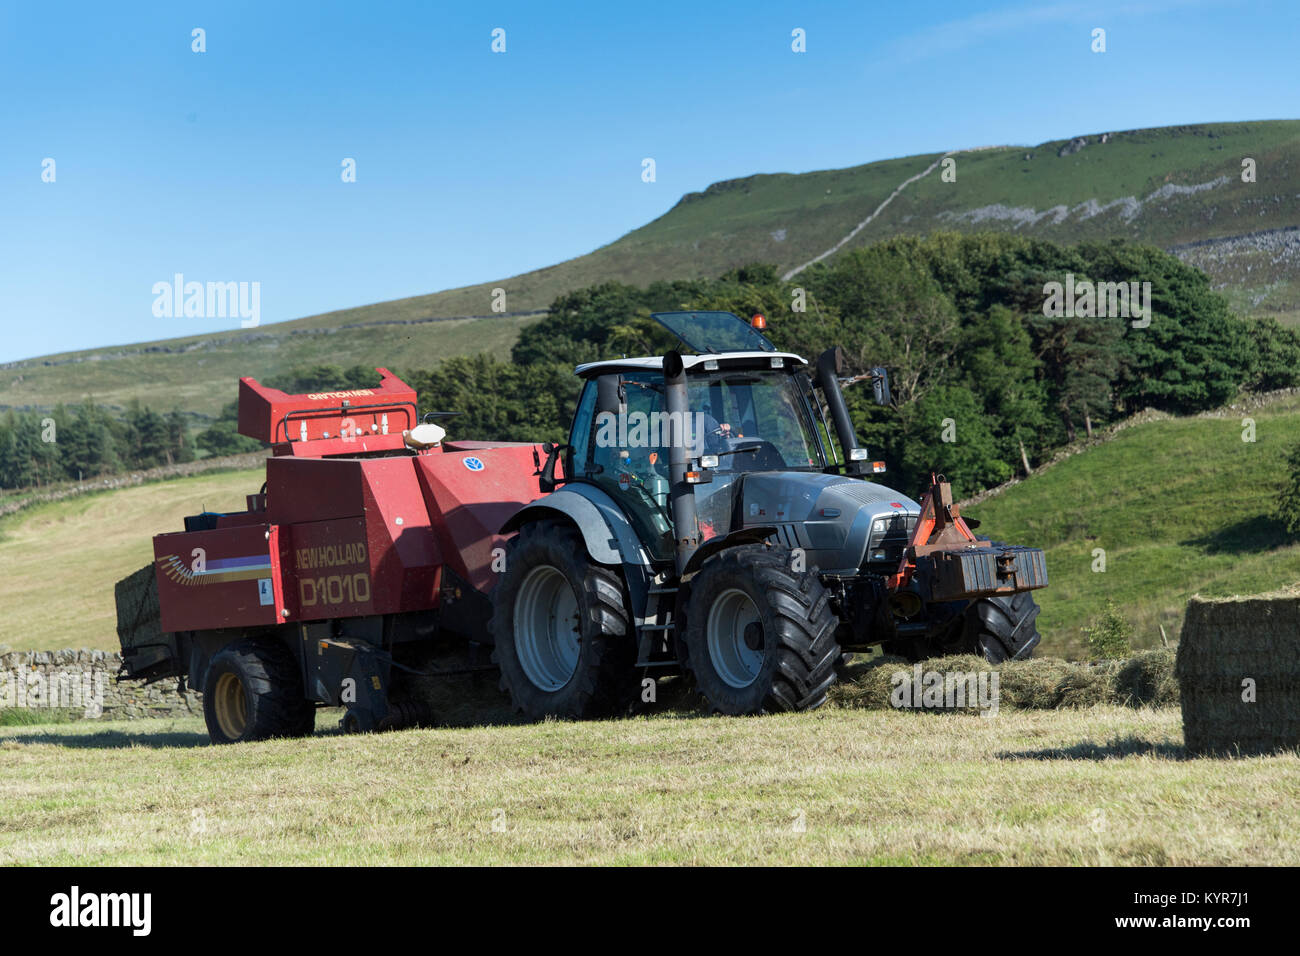 Baling a field of hay in the Yorkshire Dales with a large square baler and Hurlimann tractor. Stock Photo